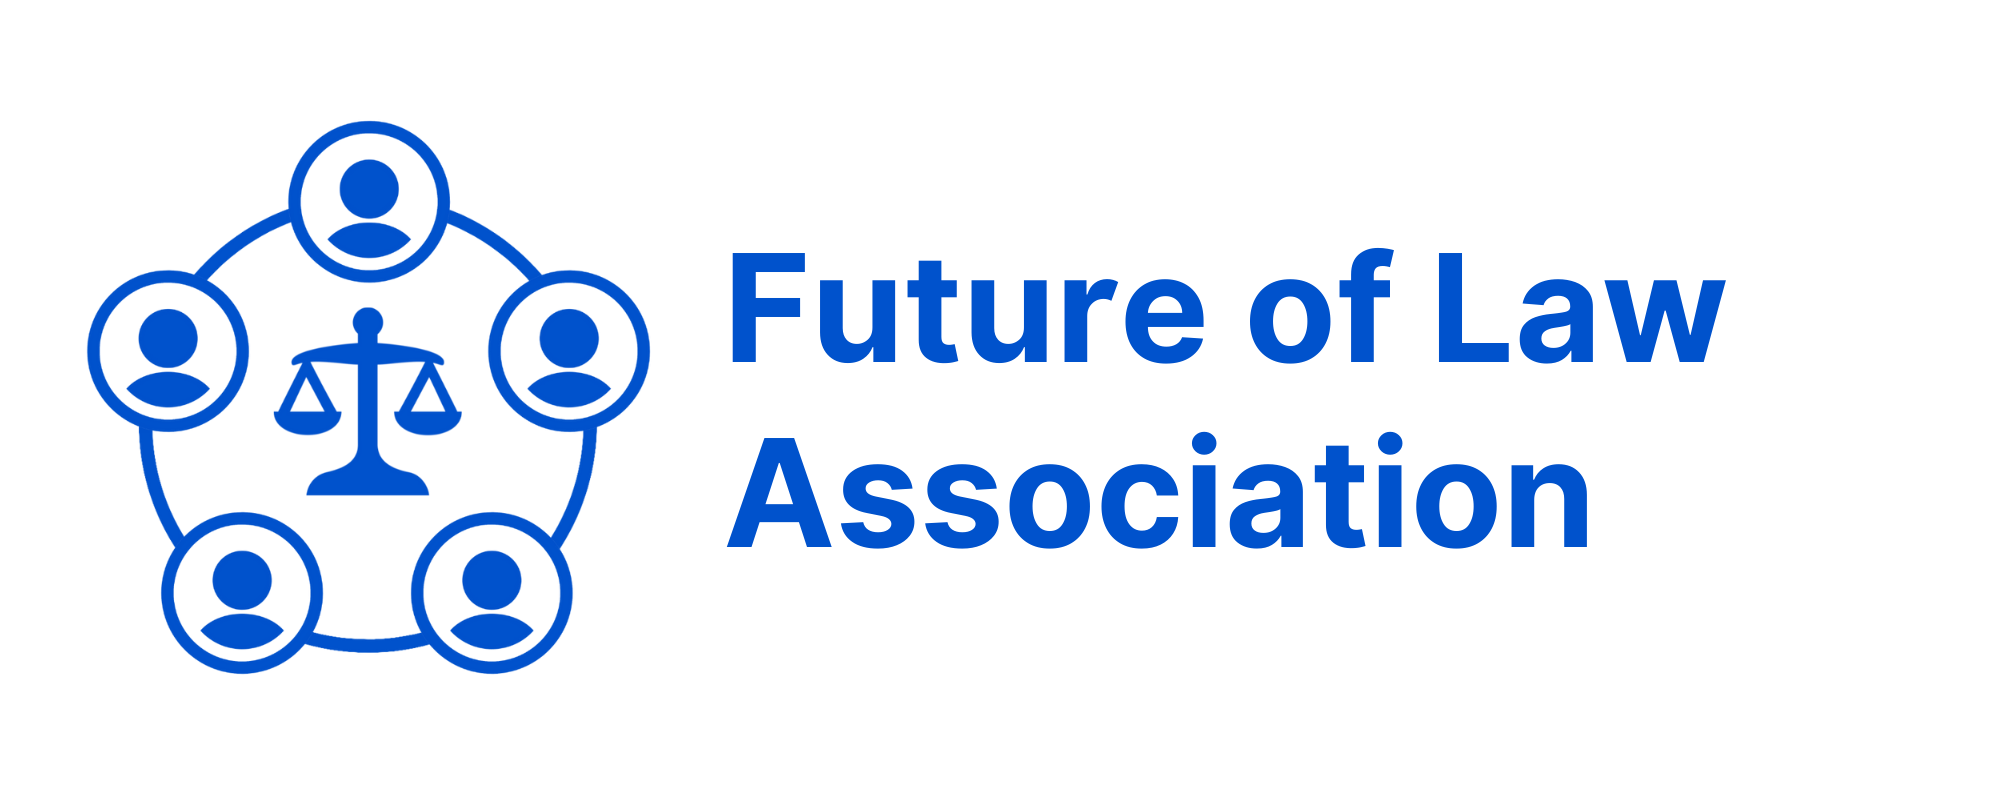 Future of Law Association